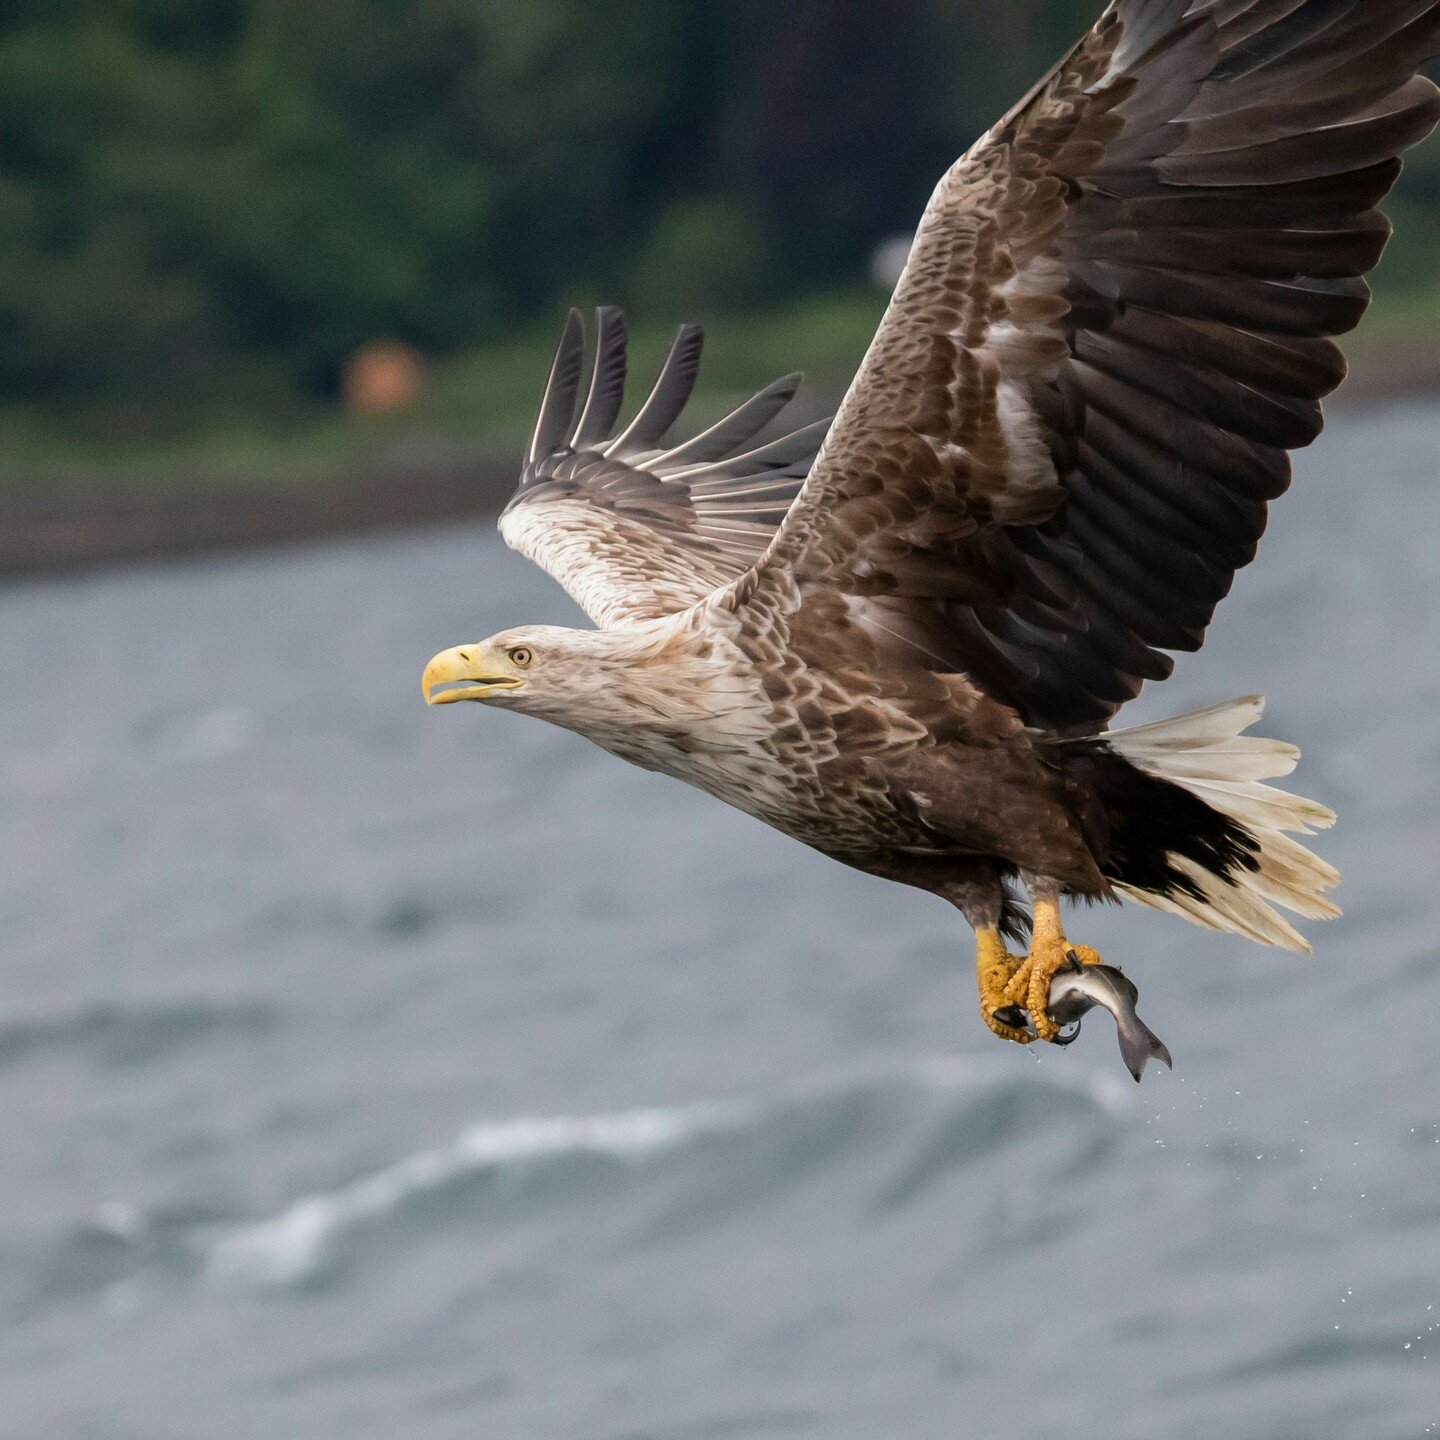 The white-tailed #eagle is an international #conservation success story. These superb #birds became extinct in #Britain in the early 1900s, but are now living here again after a re-introduction programme that brought chicks over from Norway to the is